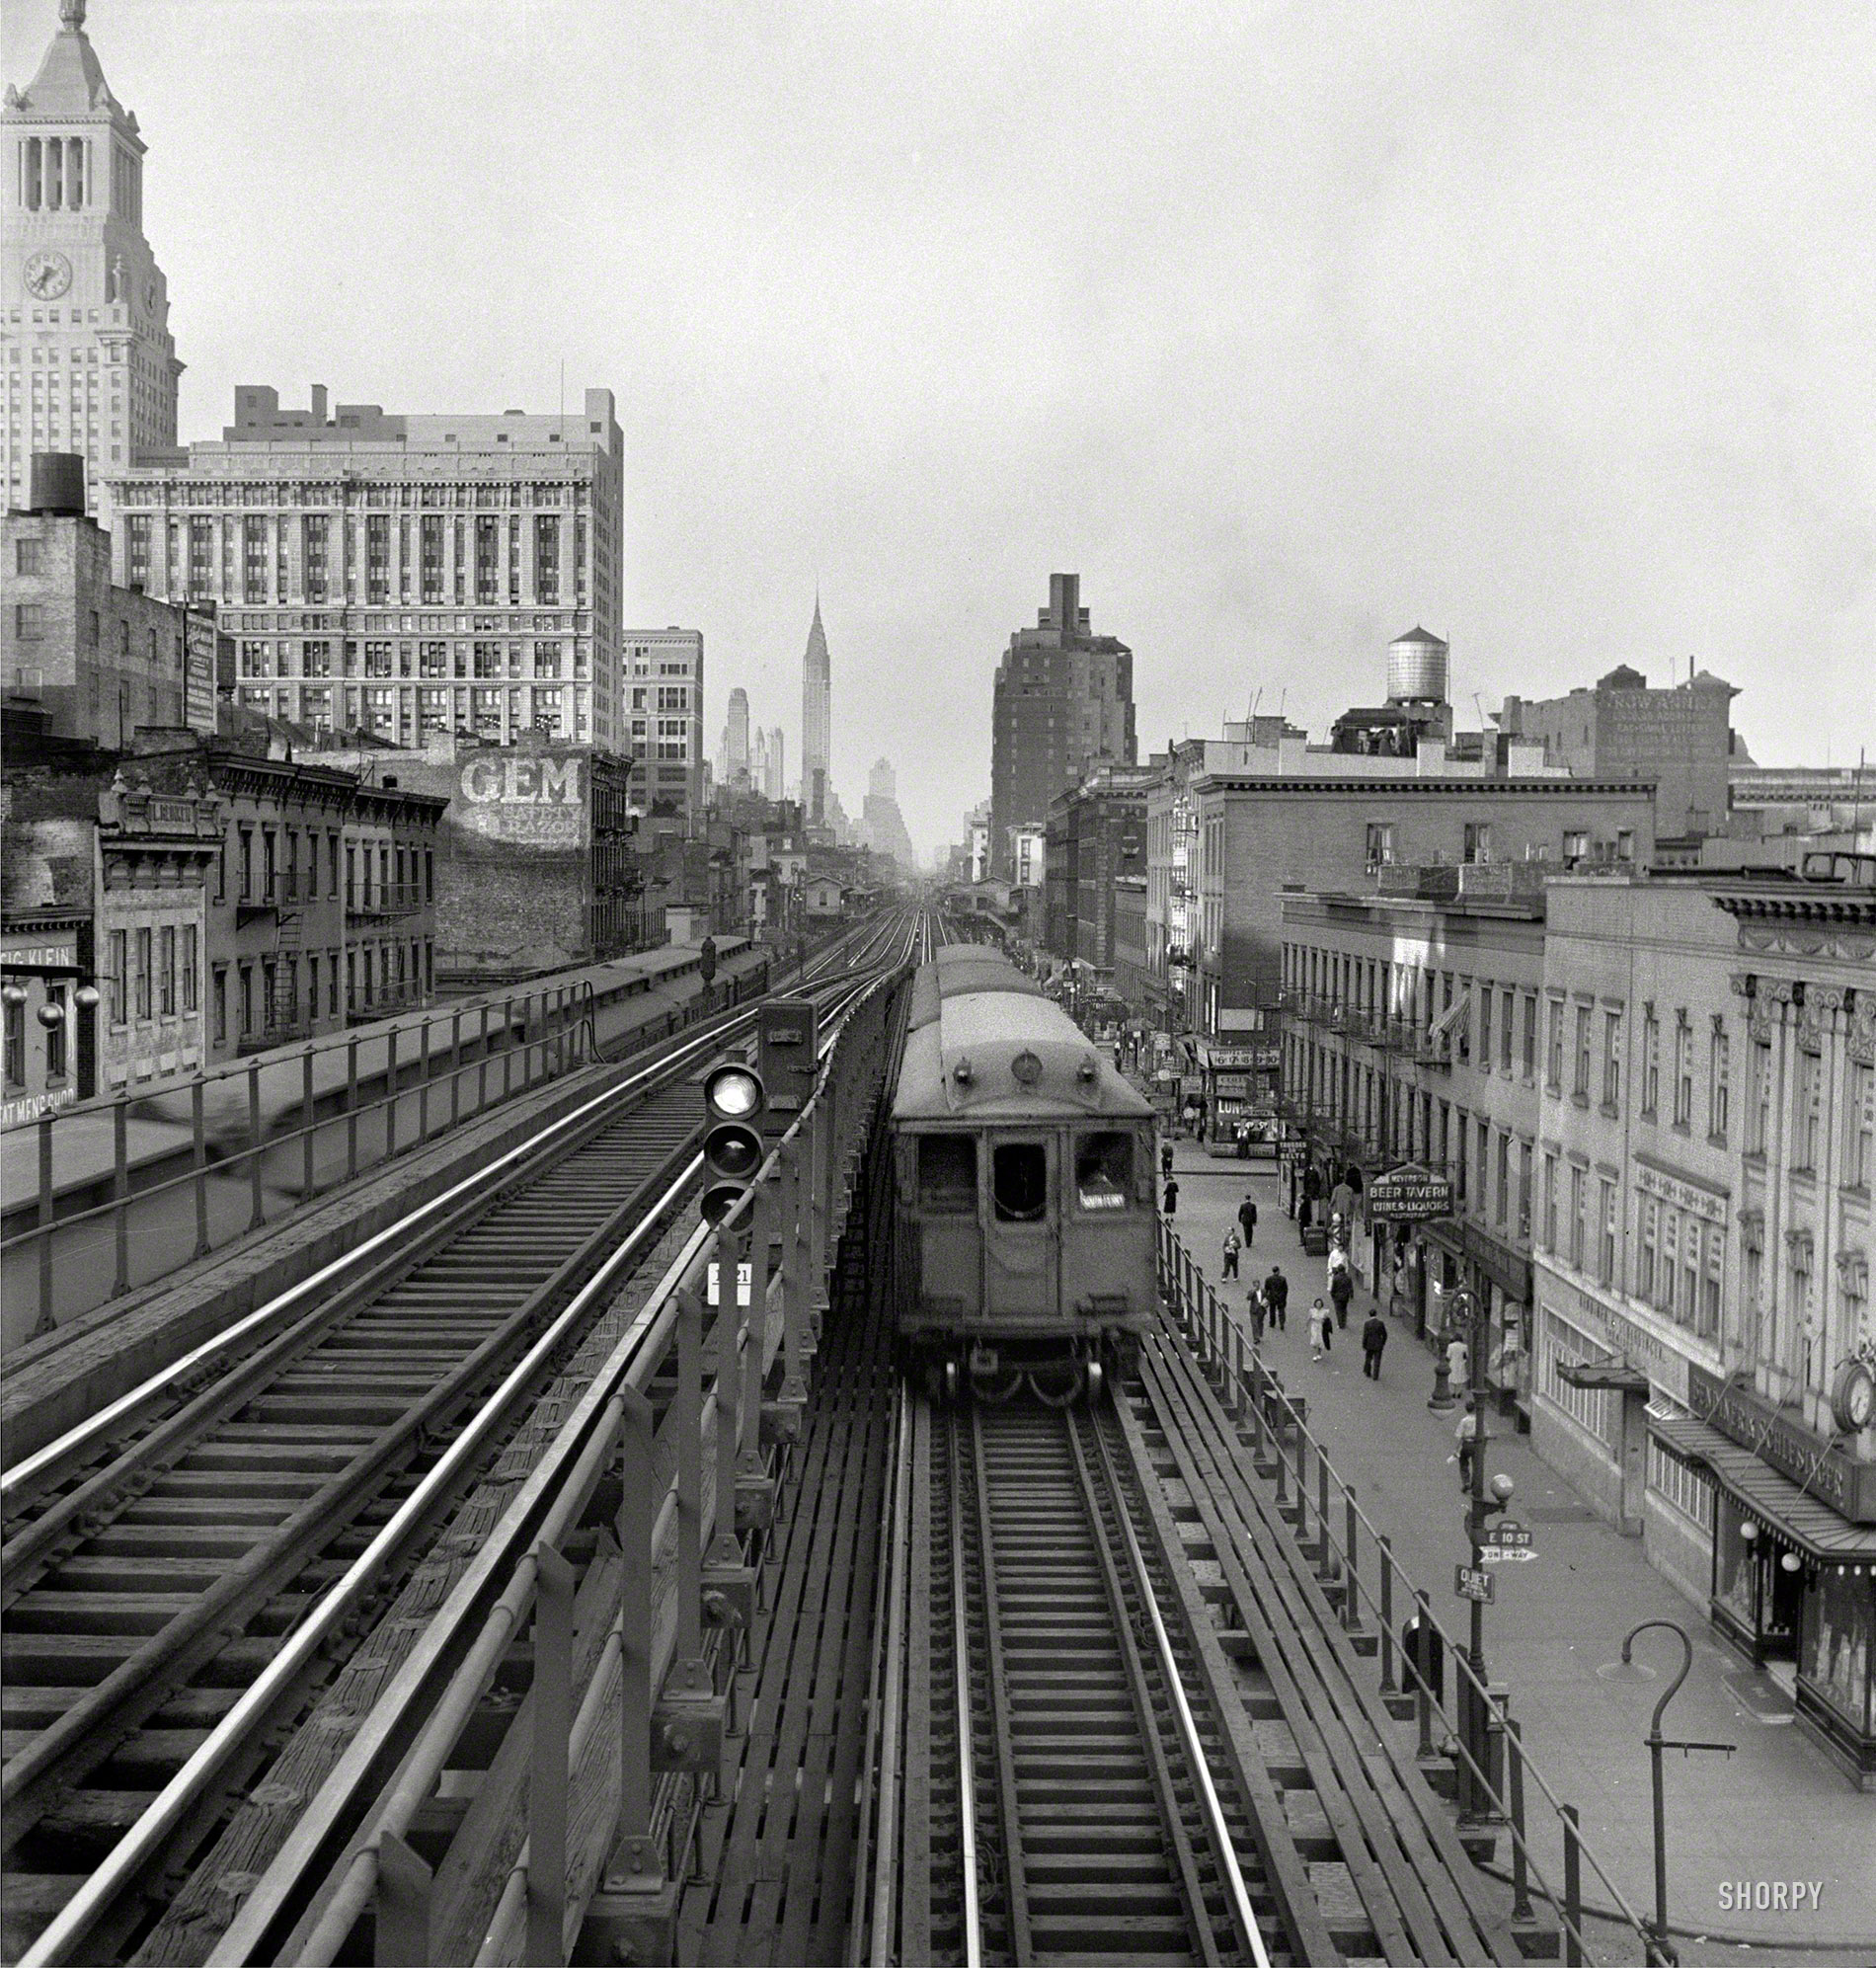 September 1942. "New York. Looking north from the Ninth Street station on the Third Avenue elevated railway as a train leaves on the local track." Medium format negative by Marjory Collins, Office of War Information. View full size.